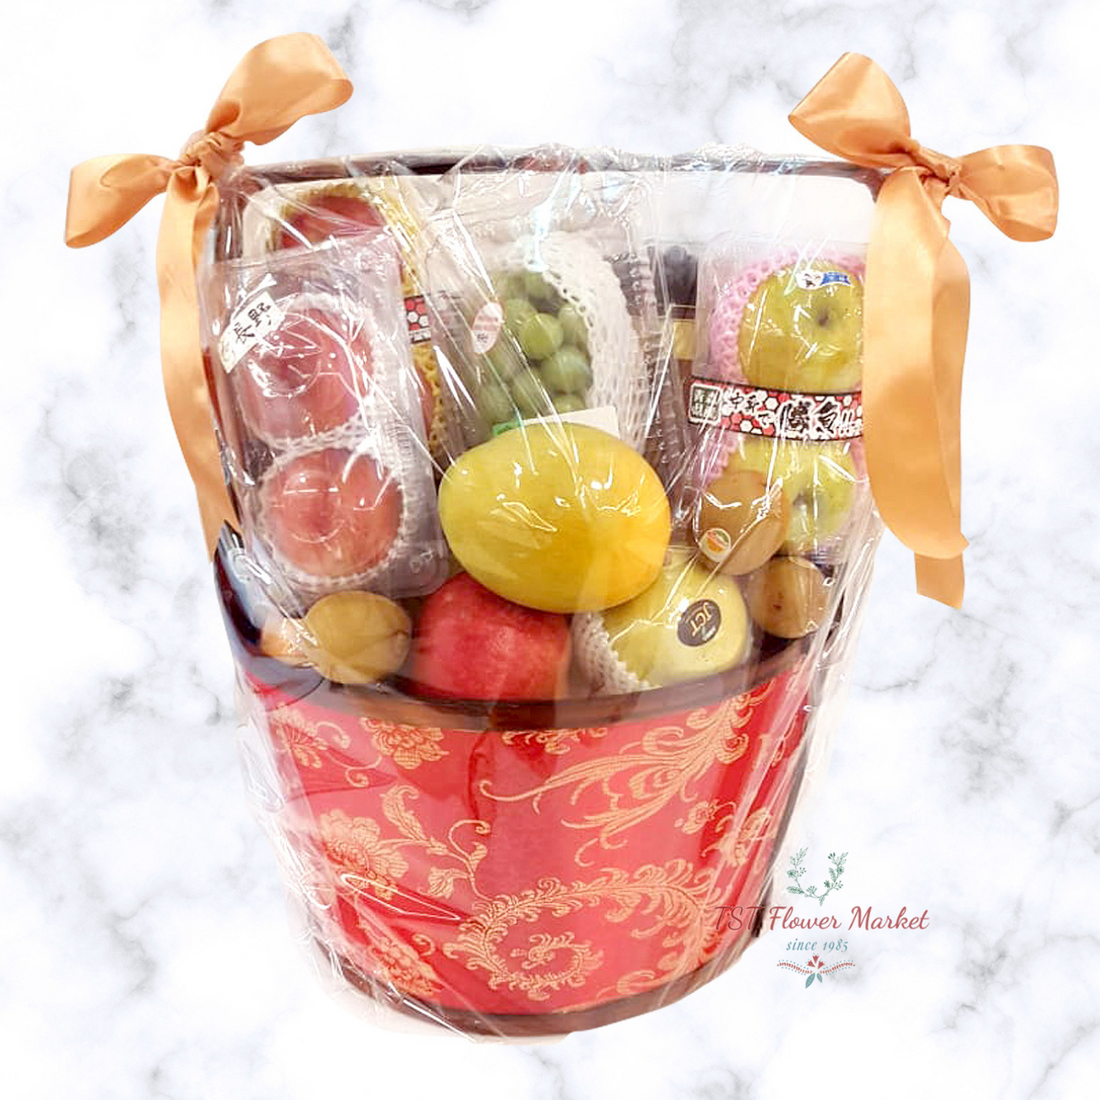 Mid Autumn Hamper 中秋節果籃A14-This hamper is packed with grapes, apples, pears, etc.-TST Flower Market